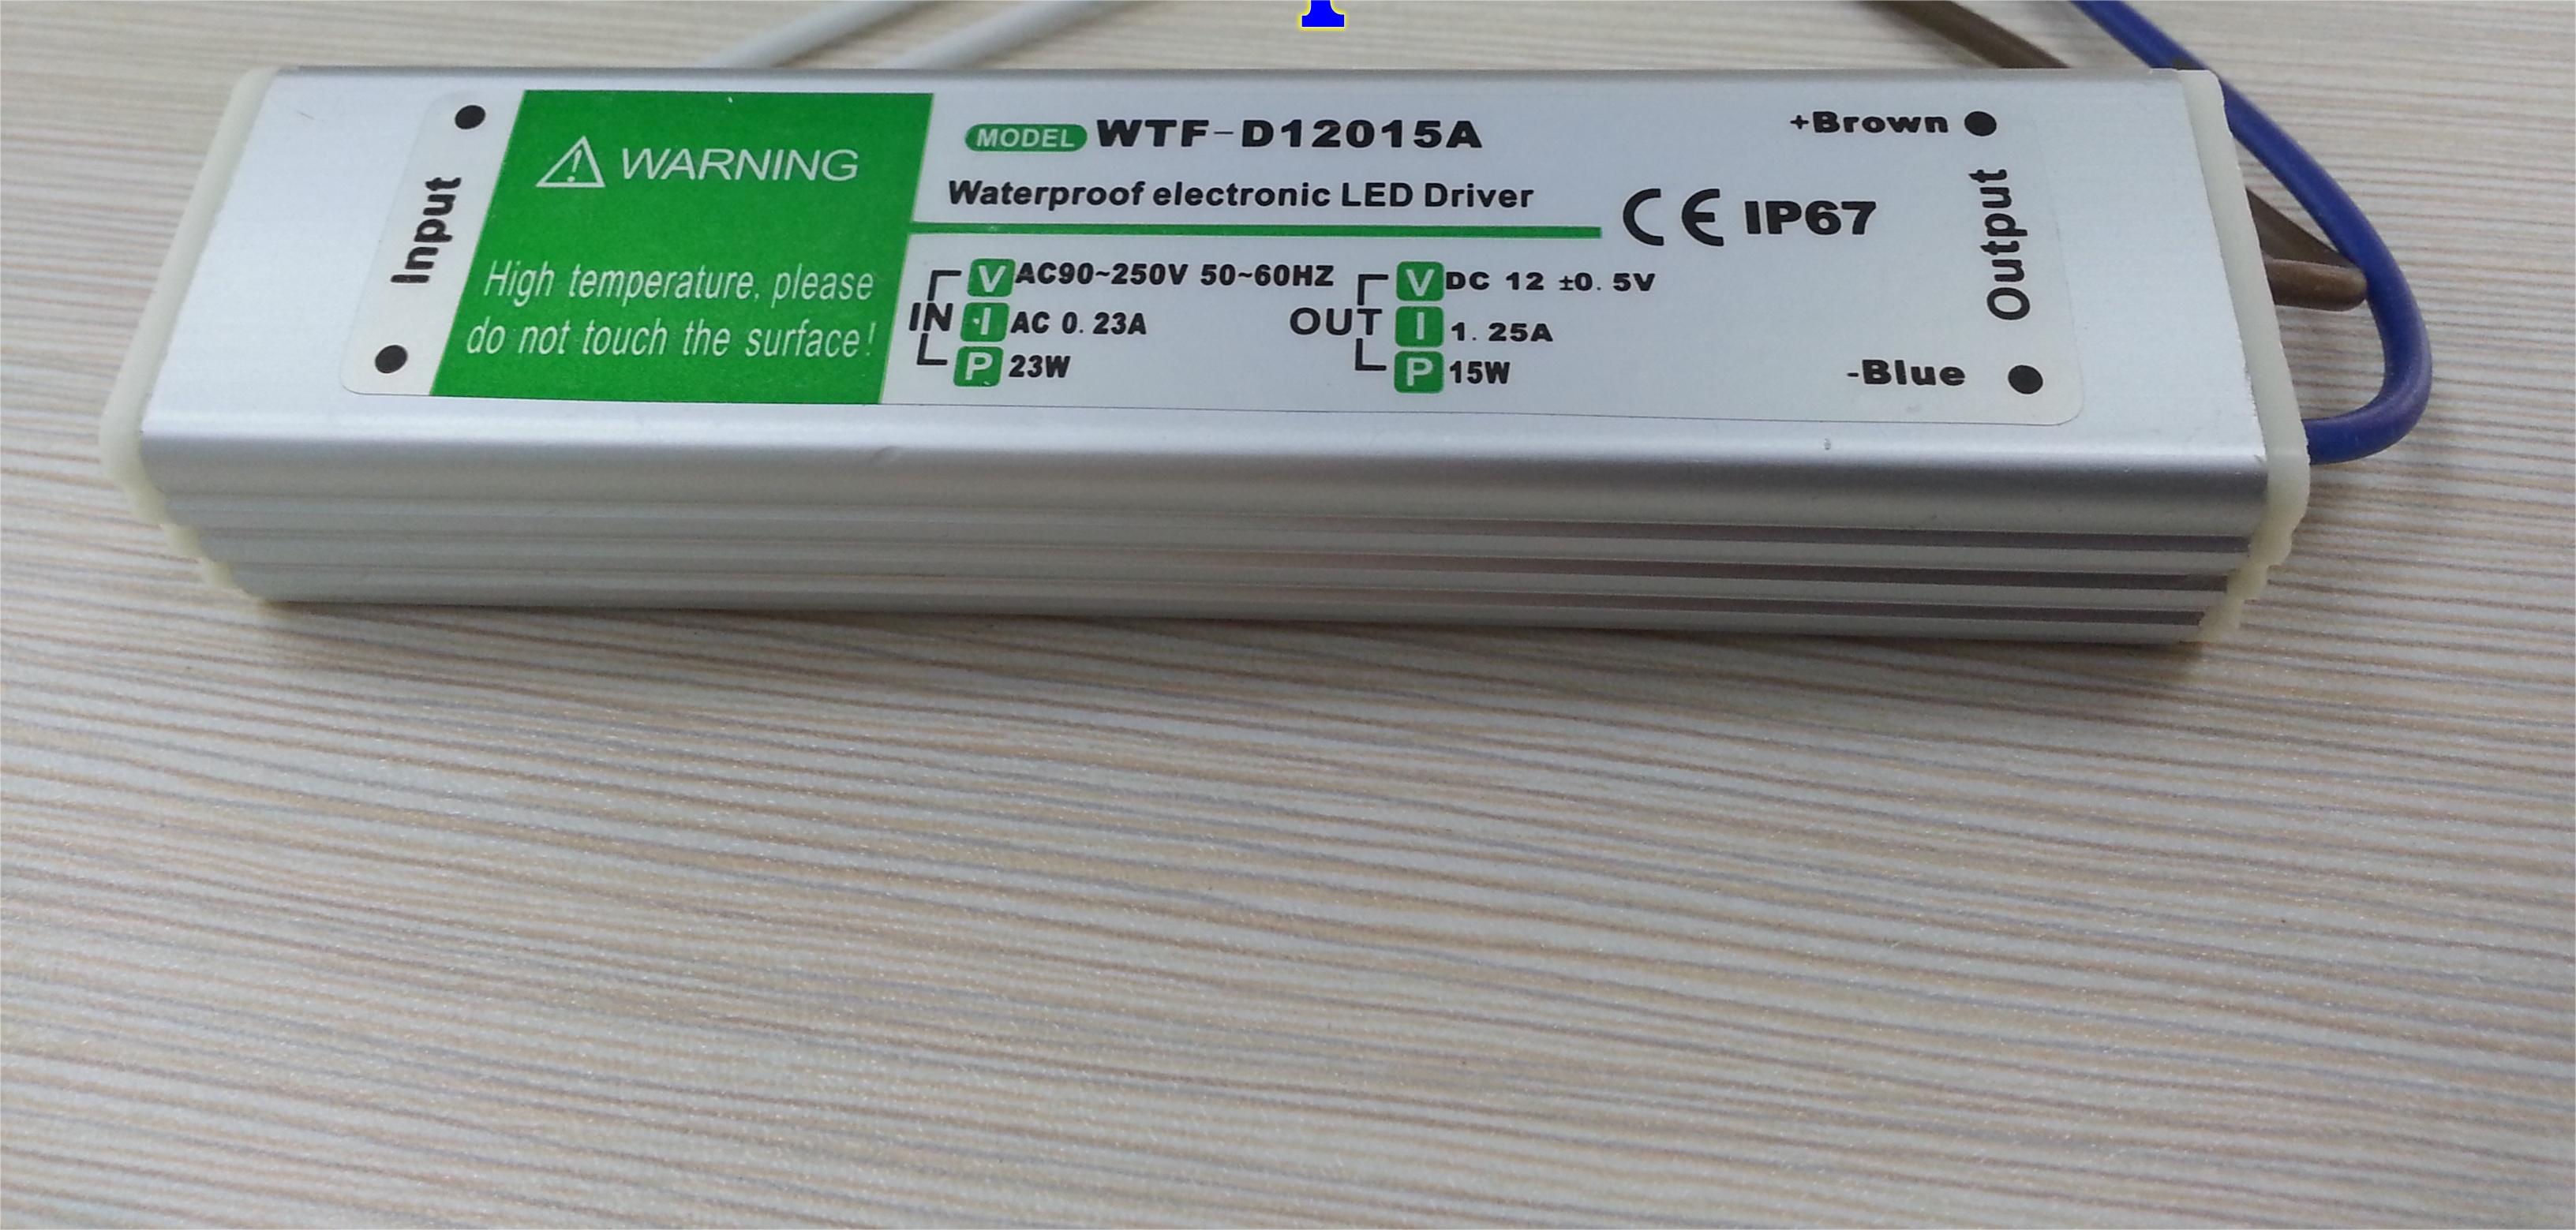 DC_12V_15W_Waterproof_Power_Supply_AC_to_DC_Transformer_led_driver